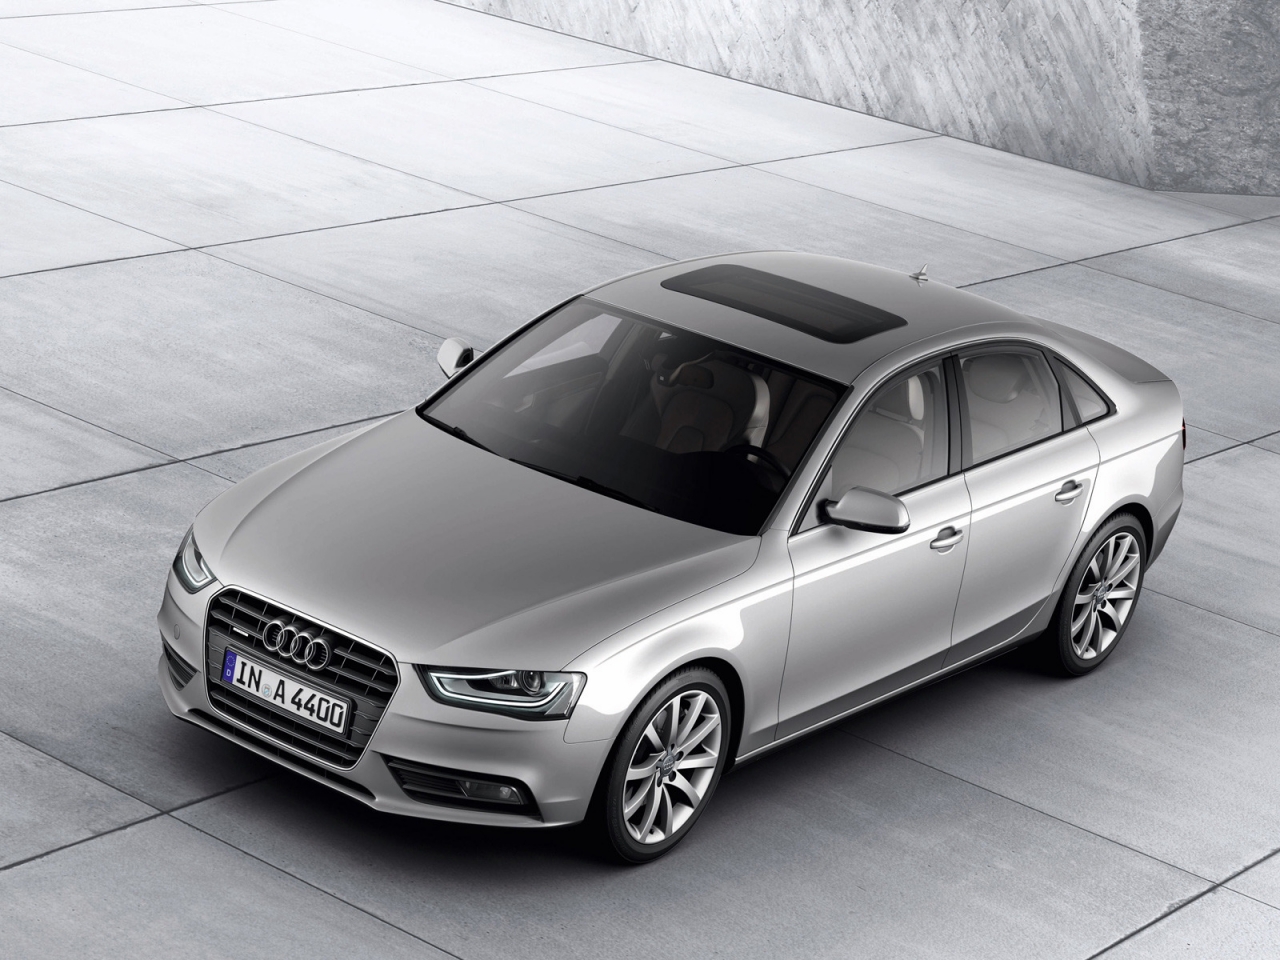 2012 Audi A4 for 1280 x 960 resolution